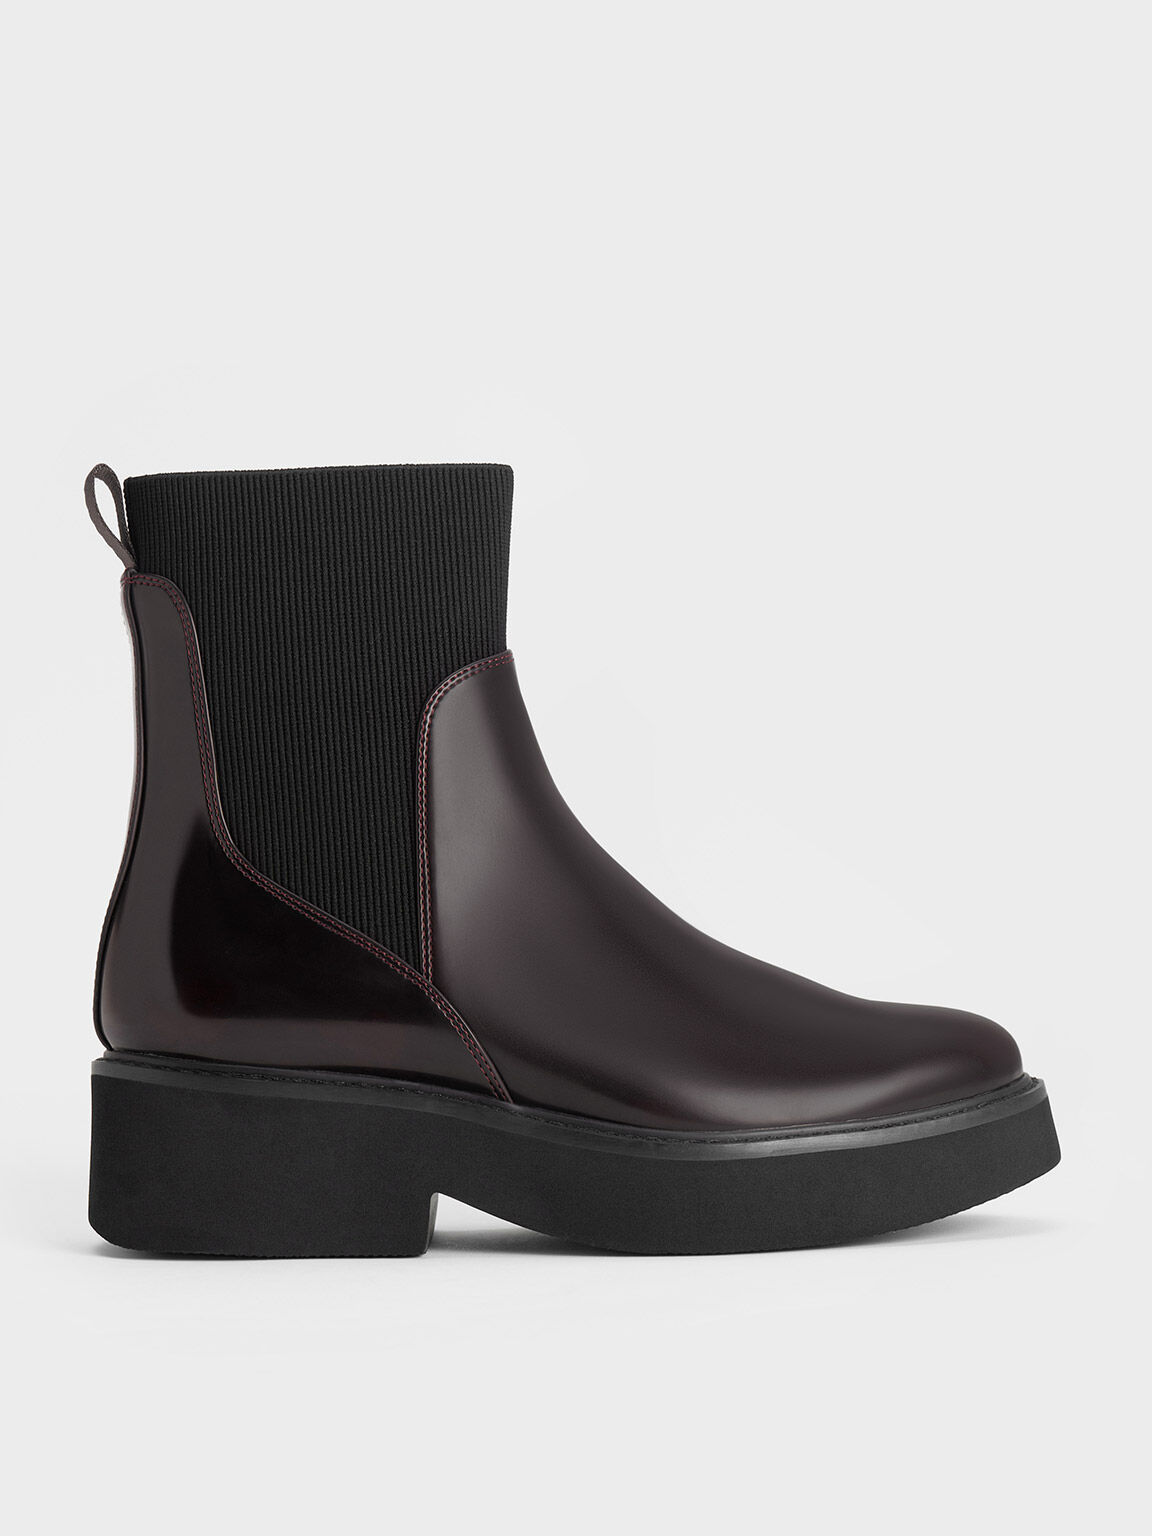 Sock-style Ankle Boots Shoes Woman | ZARA